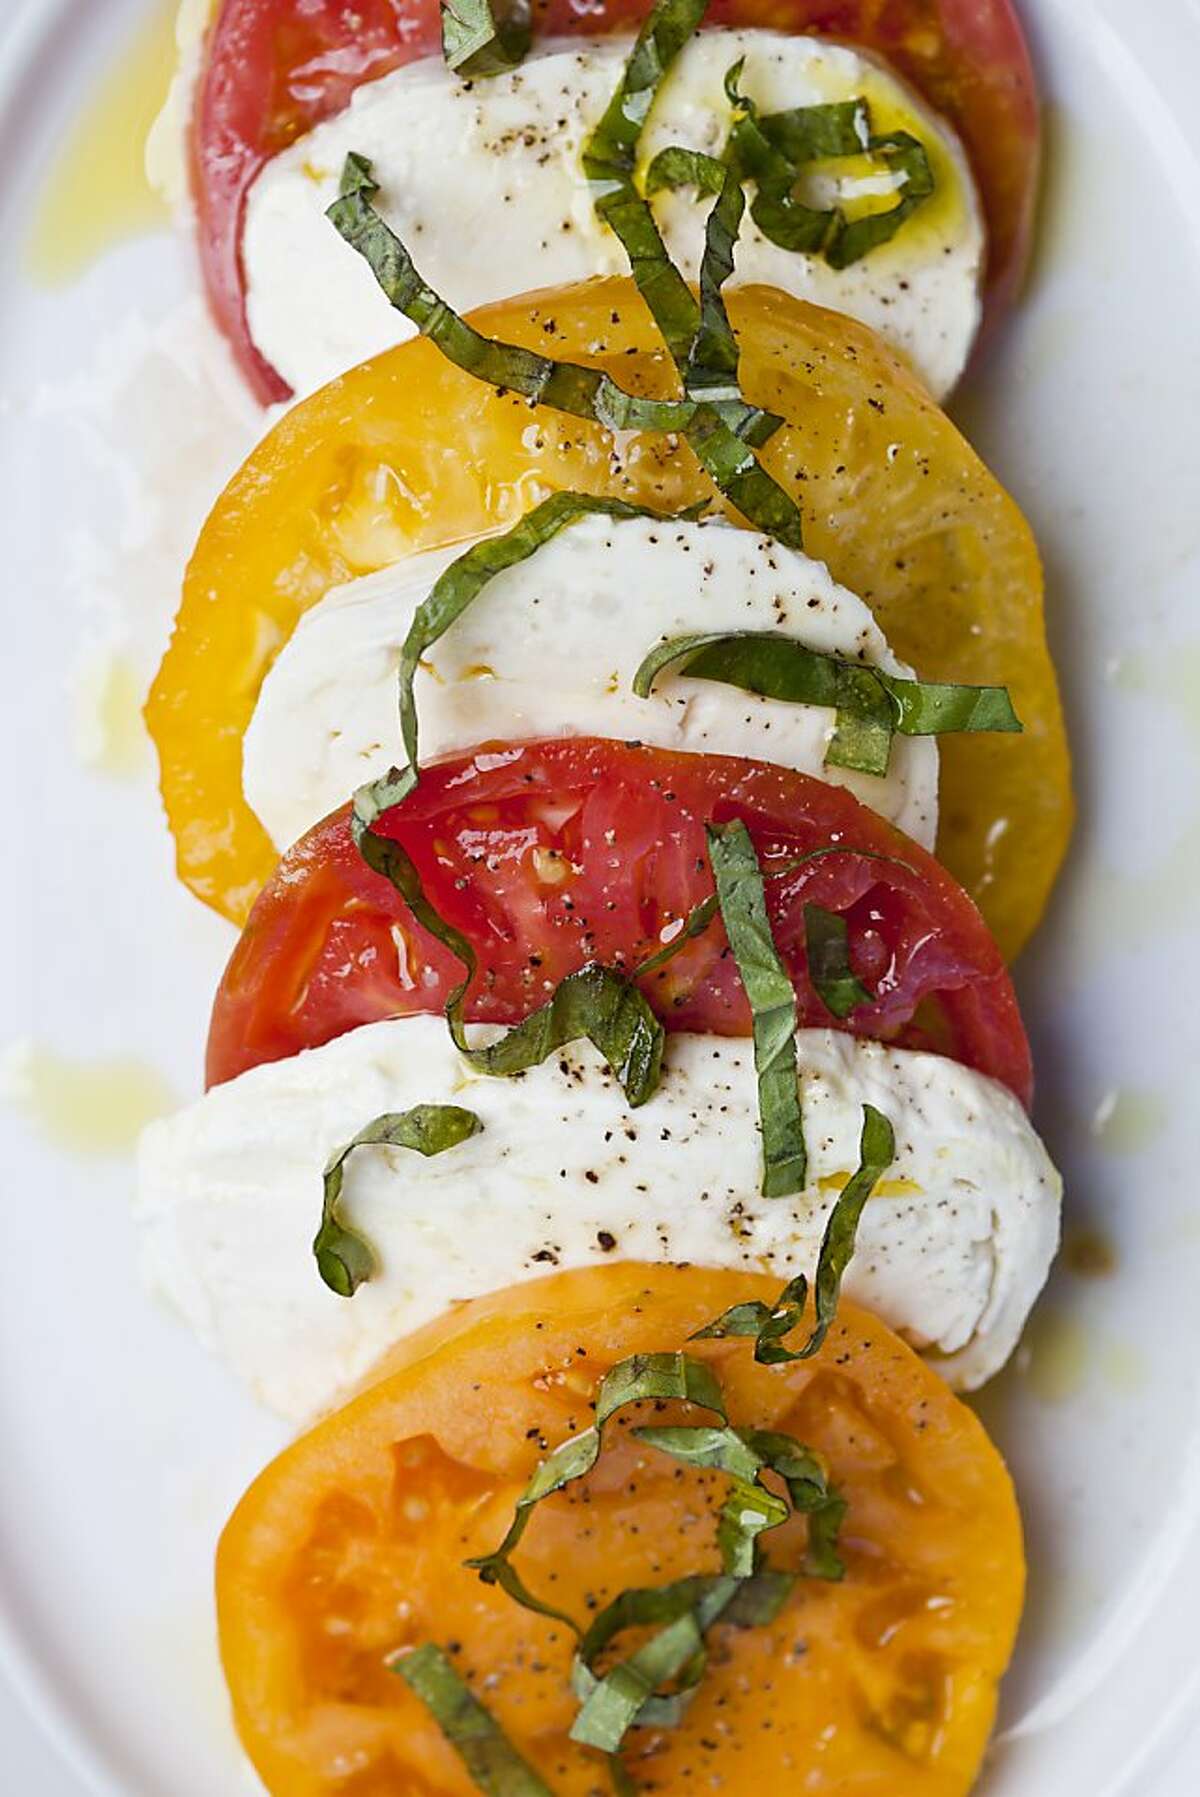 A caprese sale at Cantinetta Luca, one of David Fink's restaurants, in Carmel, Calif., Friday, September 7, 2012.